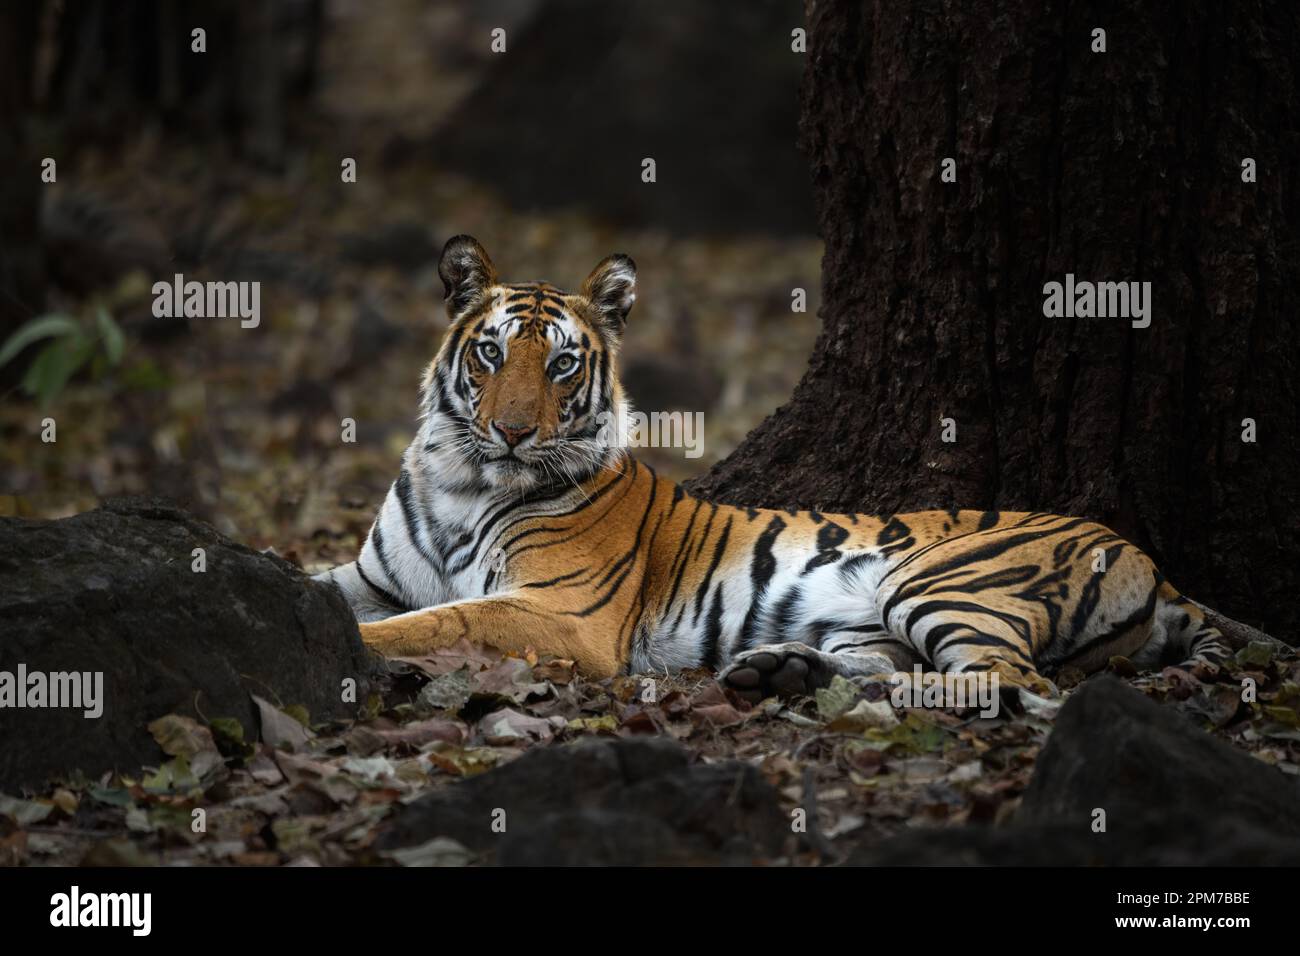 A full body portrait of a tigress from Bandhavgarh sitting on leaf litter on a summer evening Stock Photo